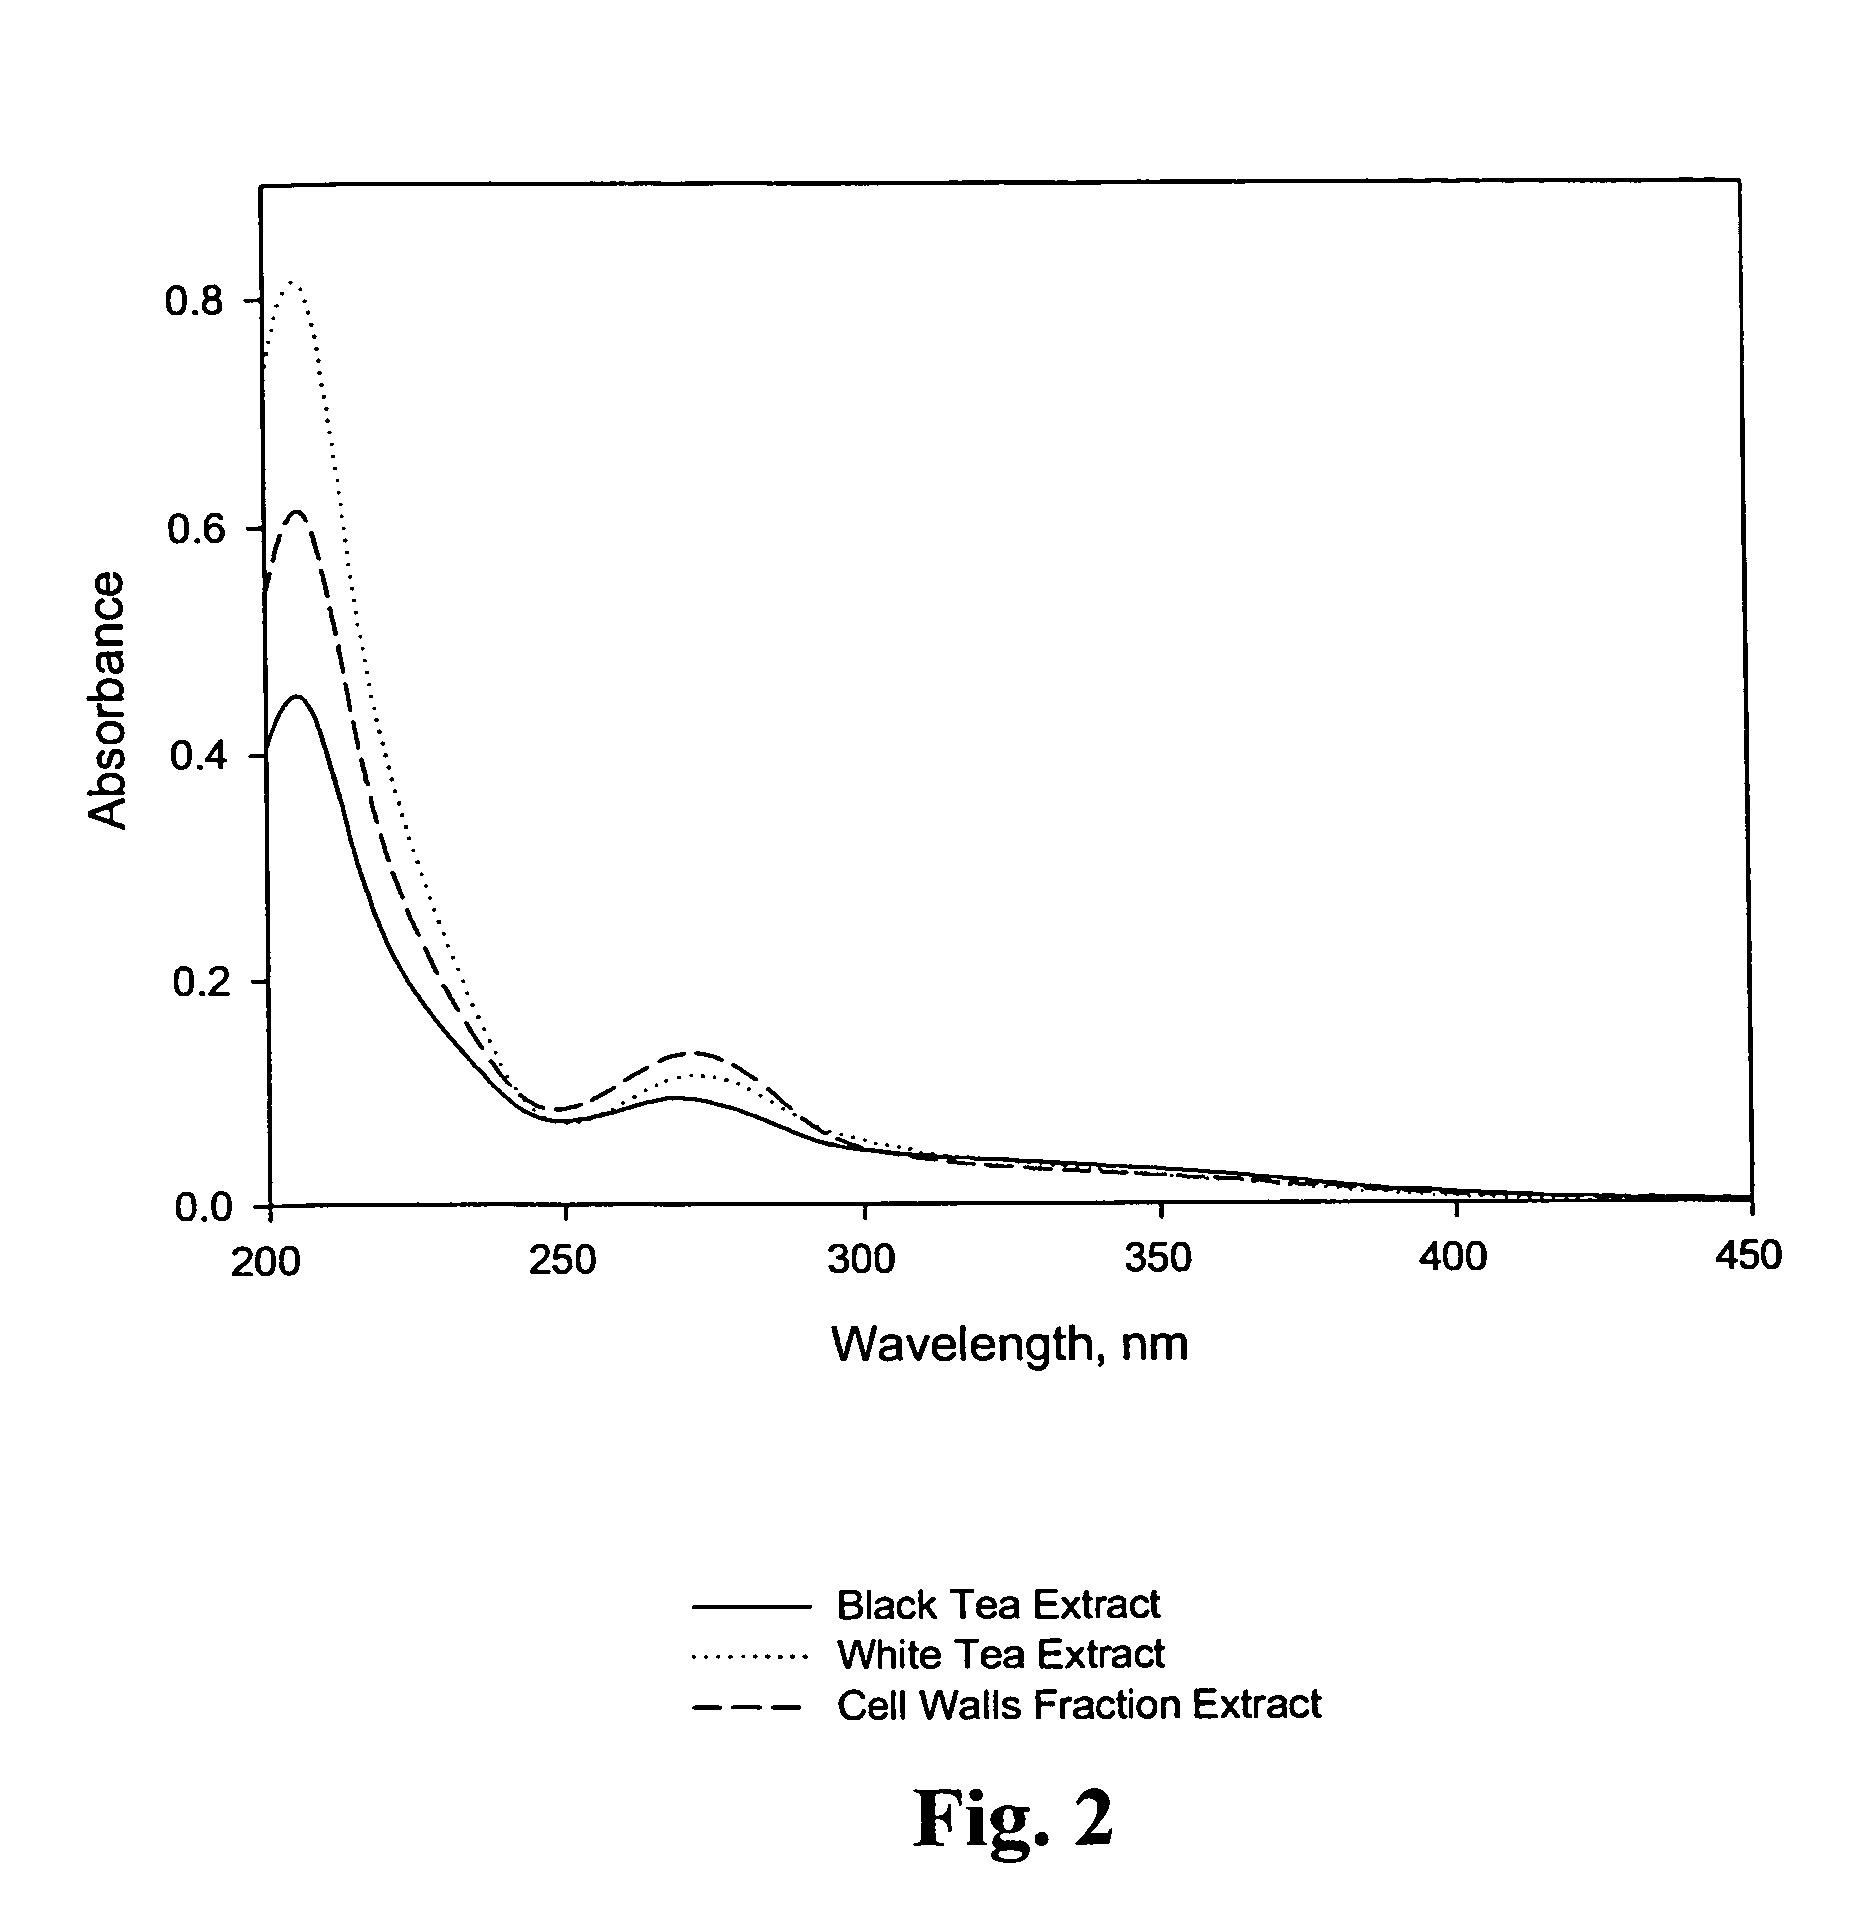 Bioactive compositions from Theacea plants and processes for their production and use